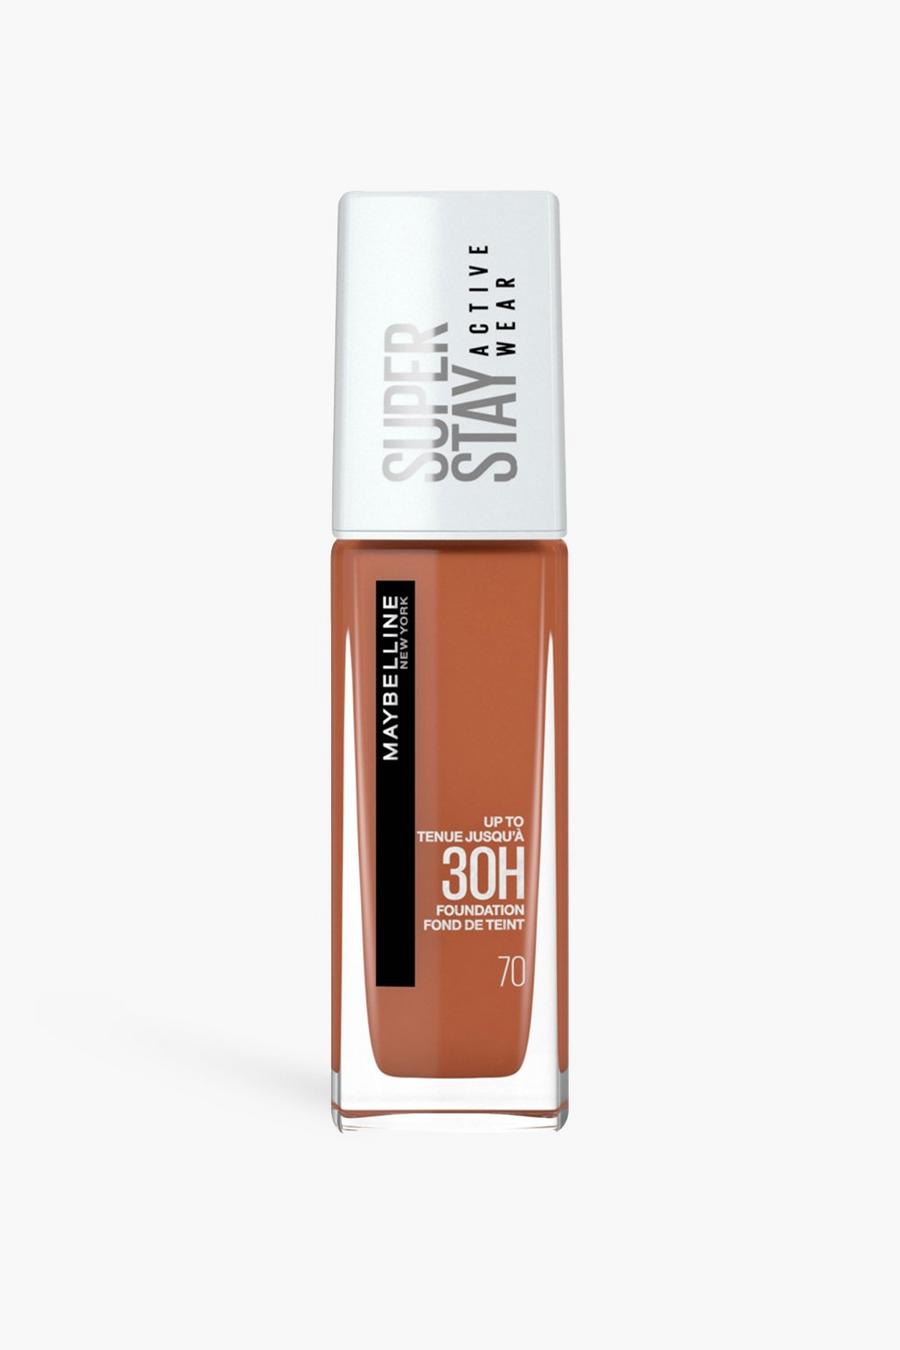 Maybelline Superstay Active Wear Full Coverage 30 Hour Long-lasting Liquid Foundation 70 Cocoa